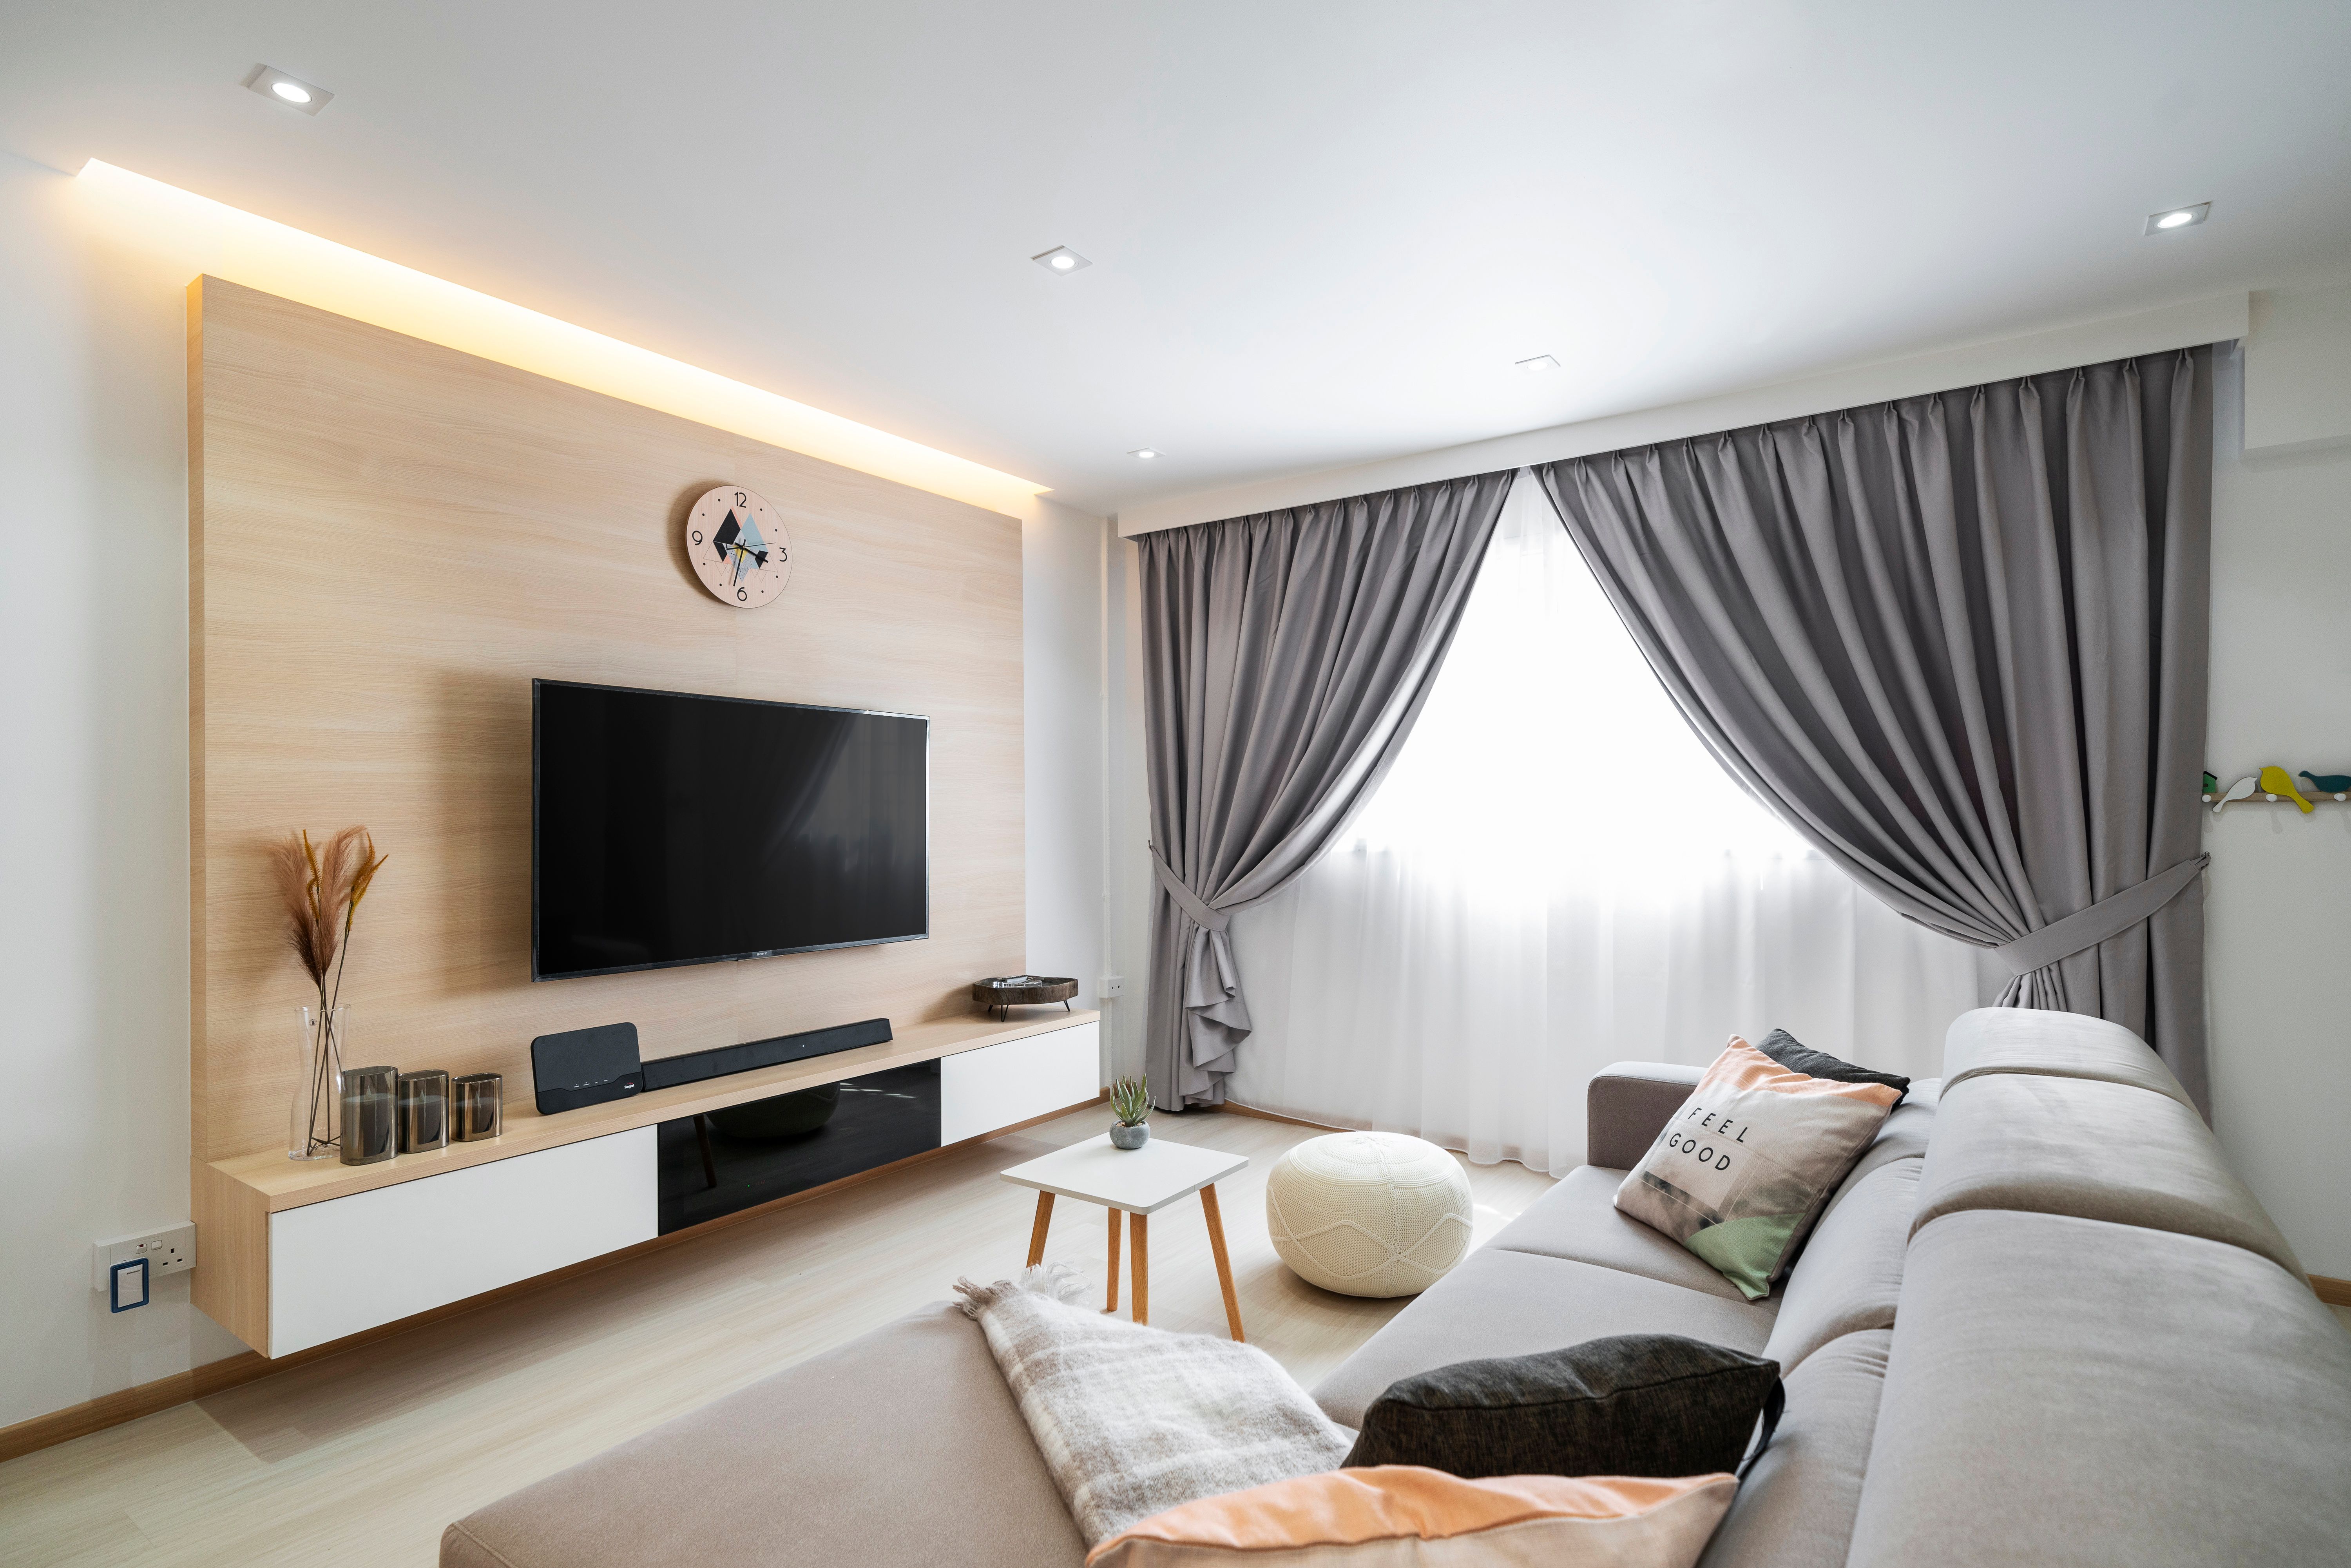 Minimalist Interior Design With Wall-Mounted TV Unit And Beige Sofa